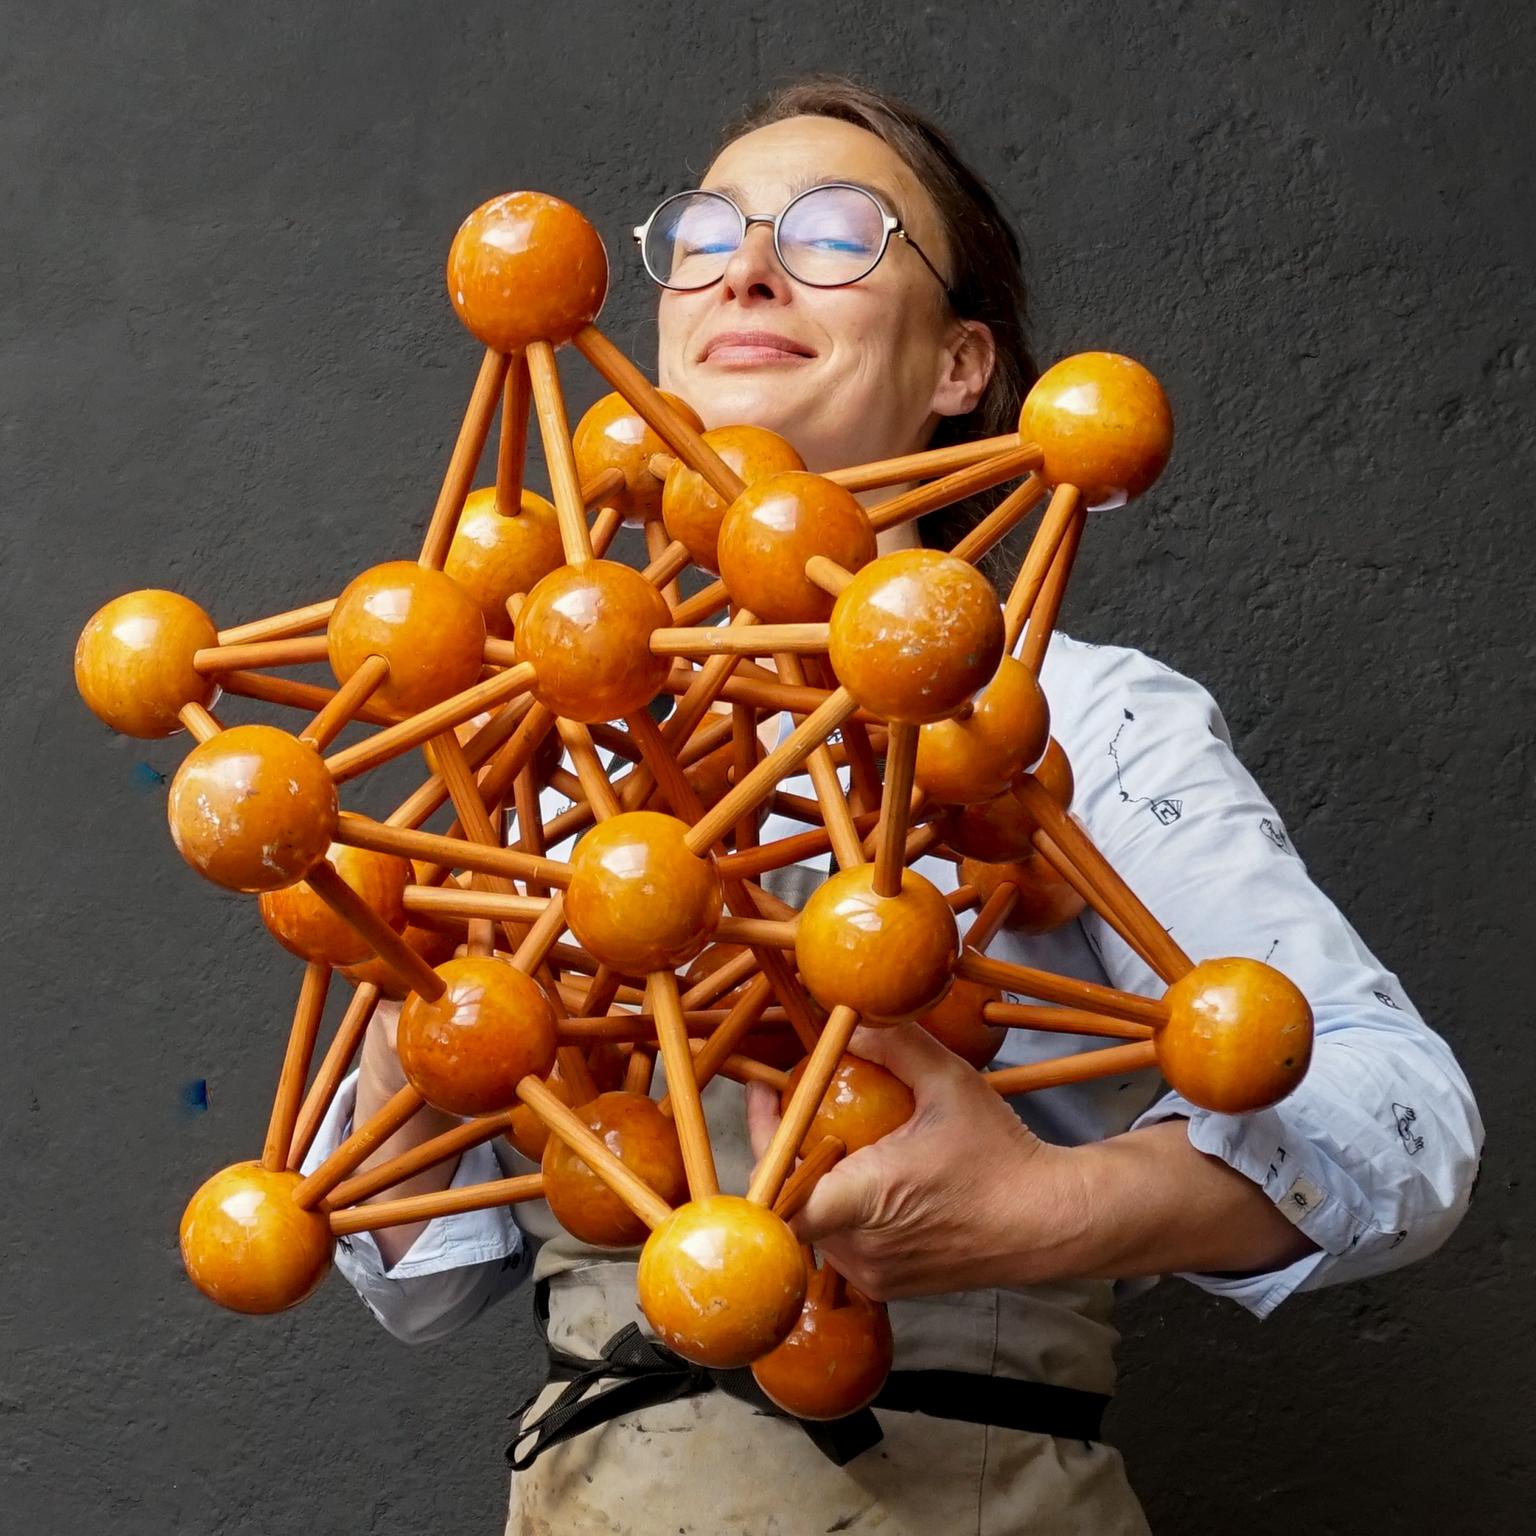 Very decorative large vintage 1950s lacquered wooden scale model of a molecule with atoms, probably once used in science class.
This large molecular model consists of 32 atoms (wooden lacquered balls) intertwined by wooden sticks (atomic bonds).